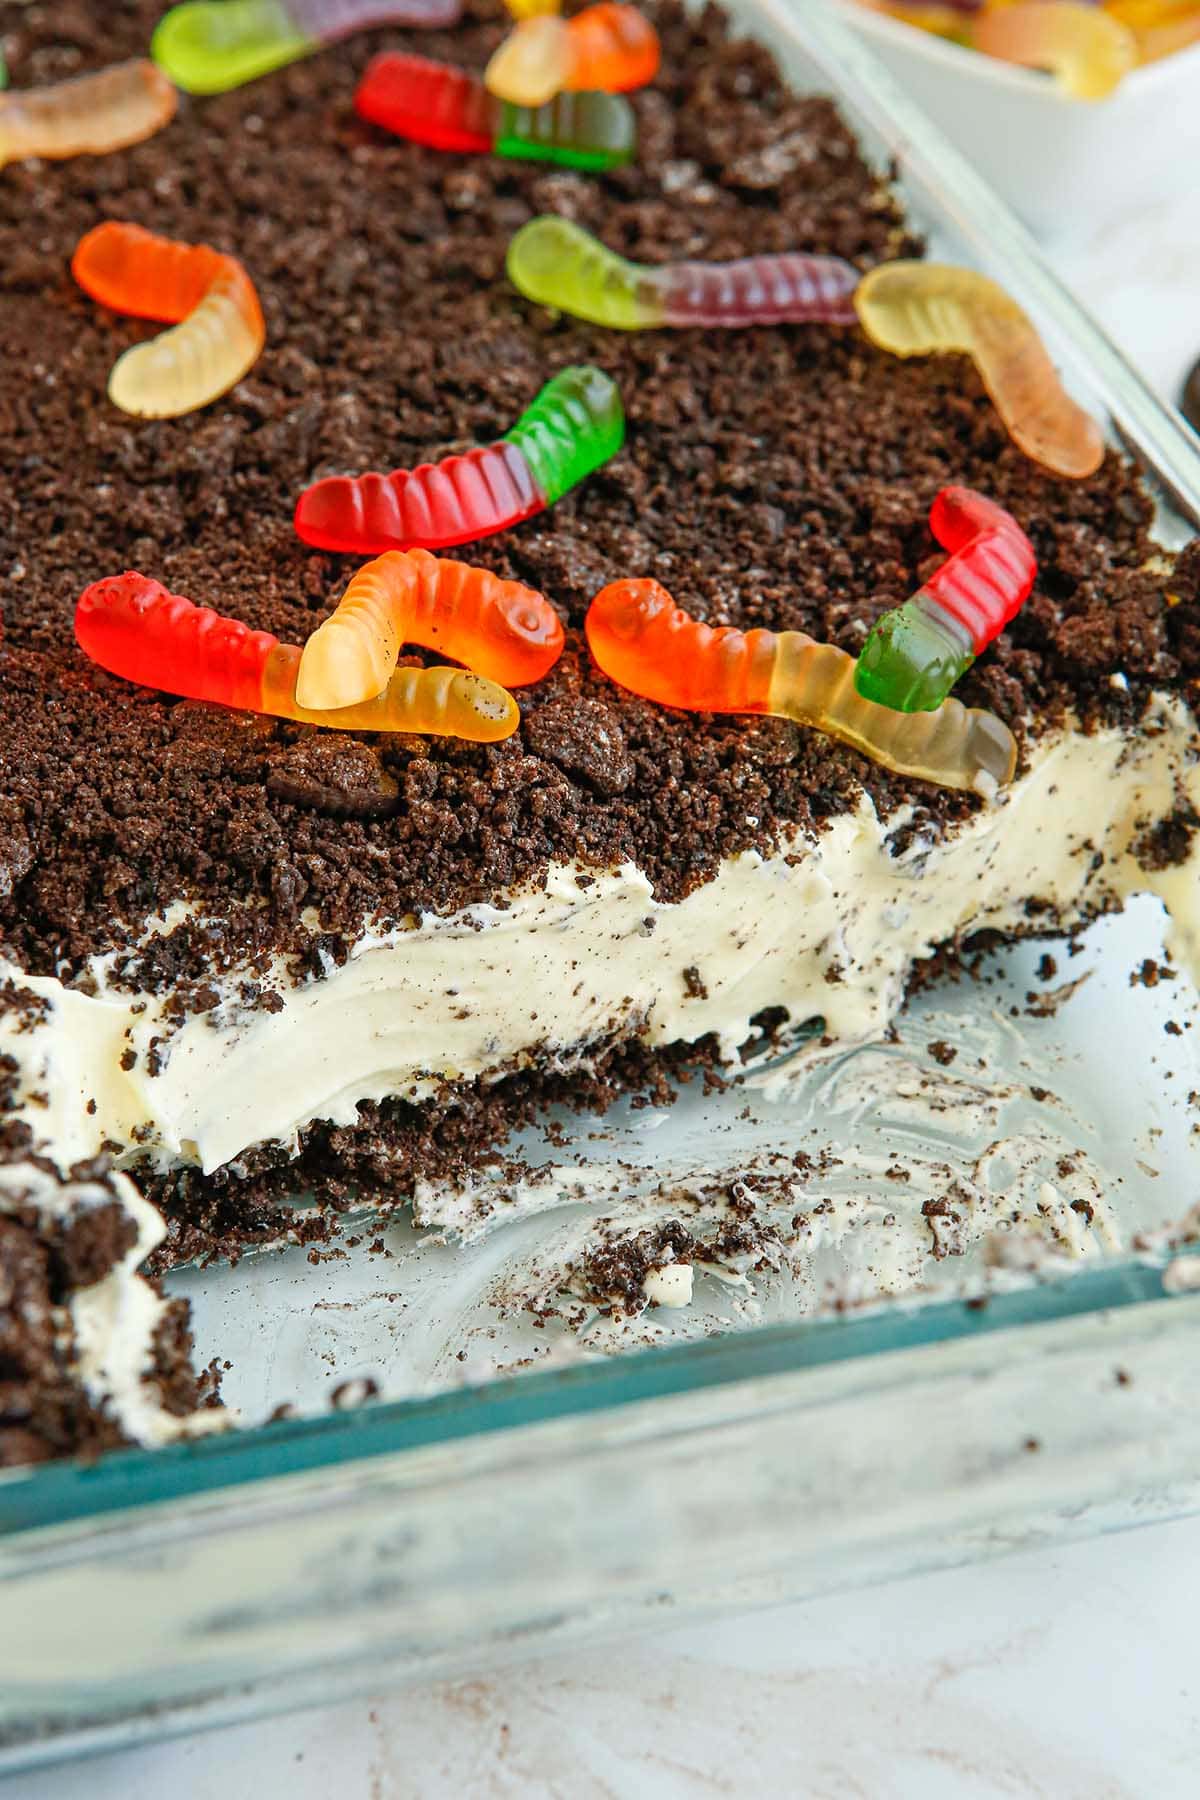 Oreo Dirt Cake with candy worm